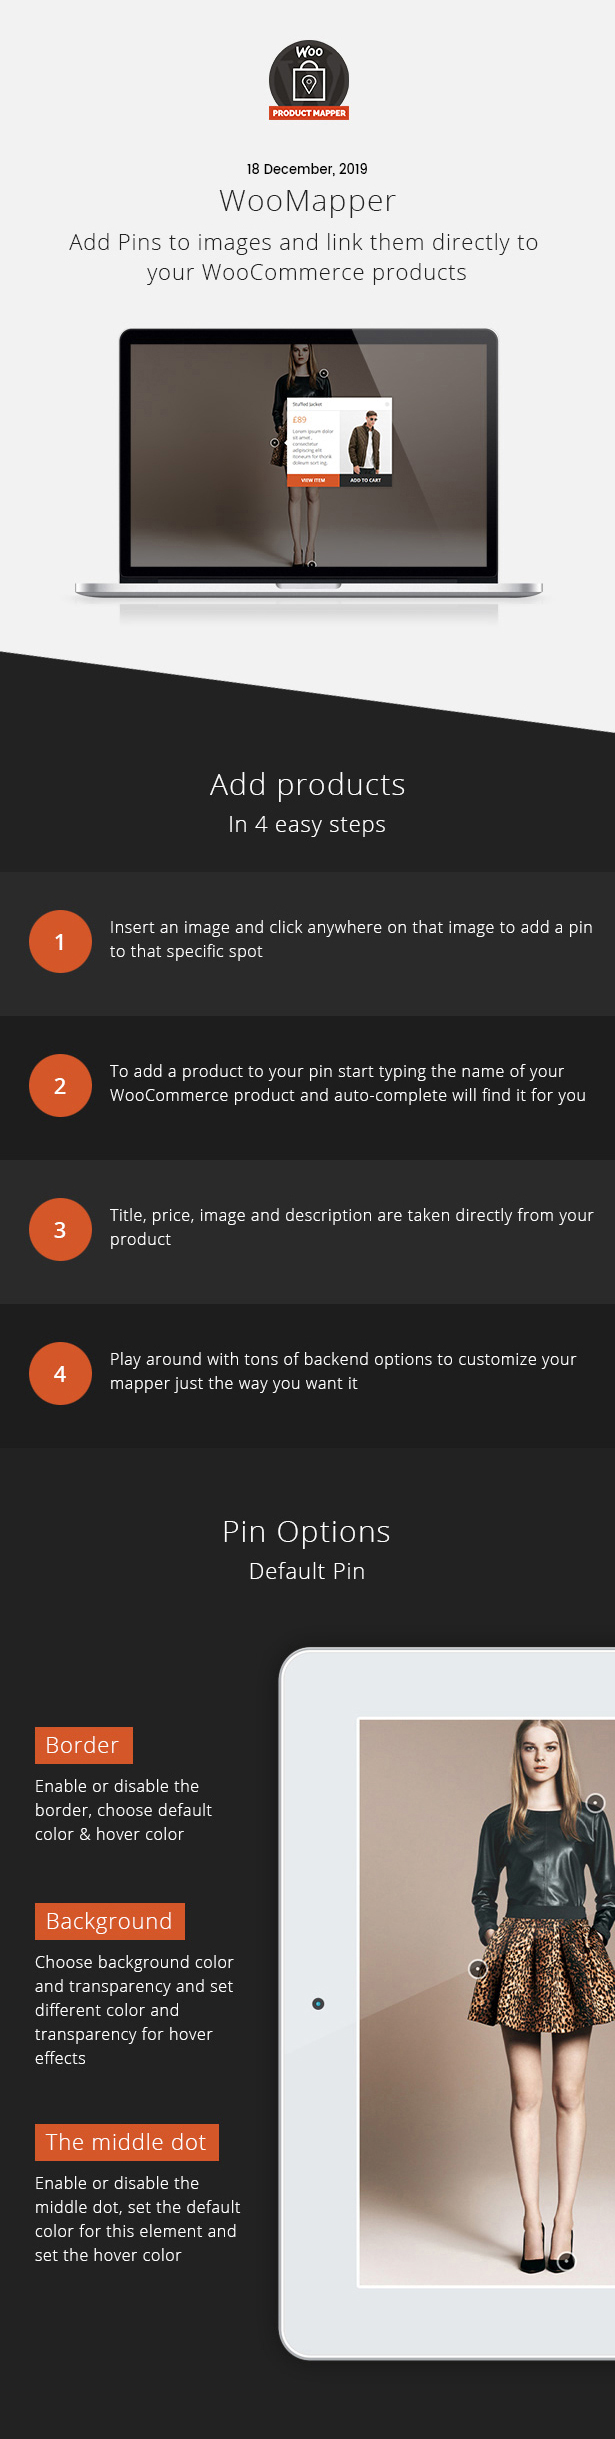 WooMapper - WordPress Hotspot Plugin, Display WooCommerce Products, Add Pins To Images - 1